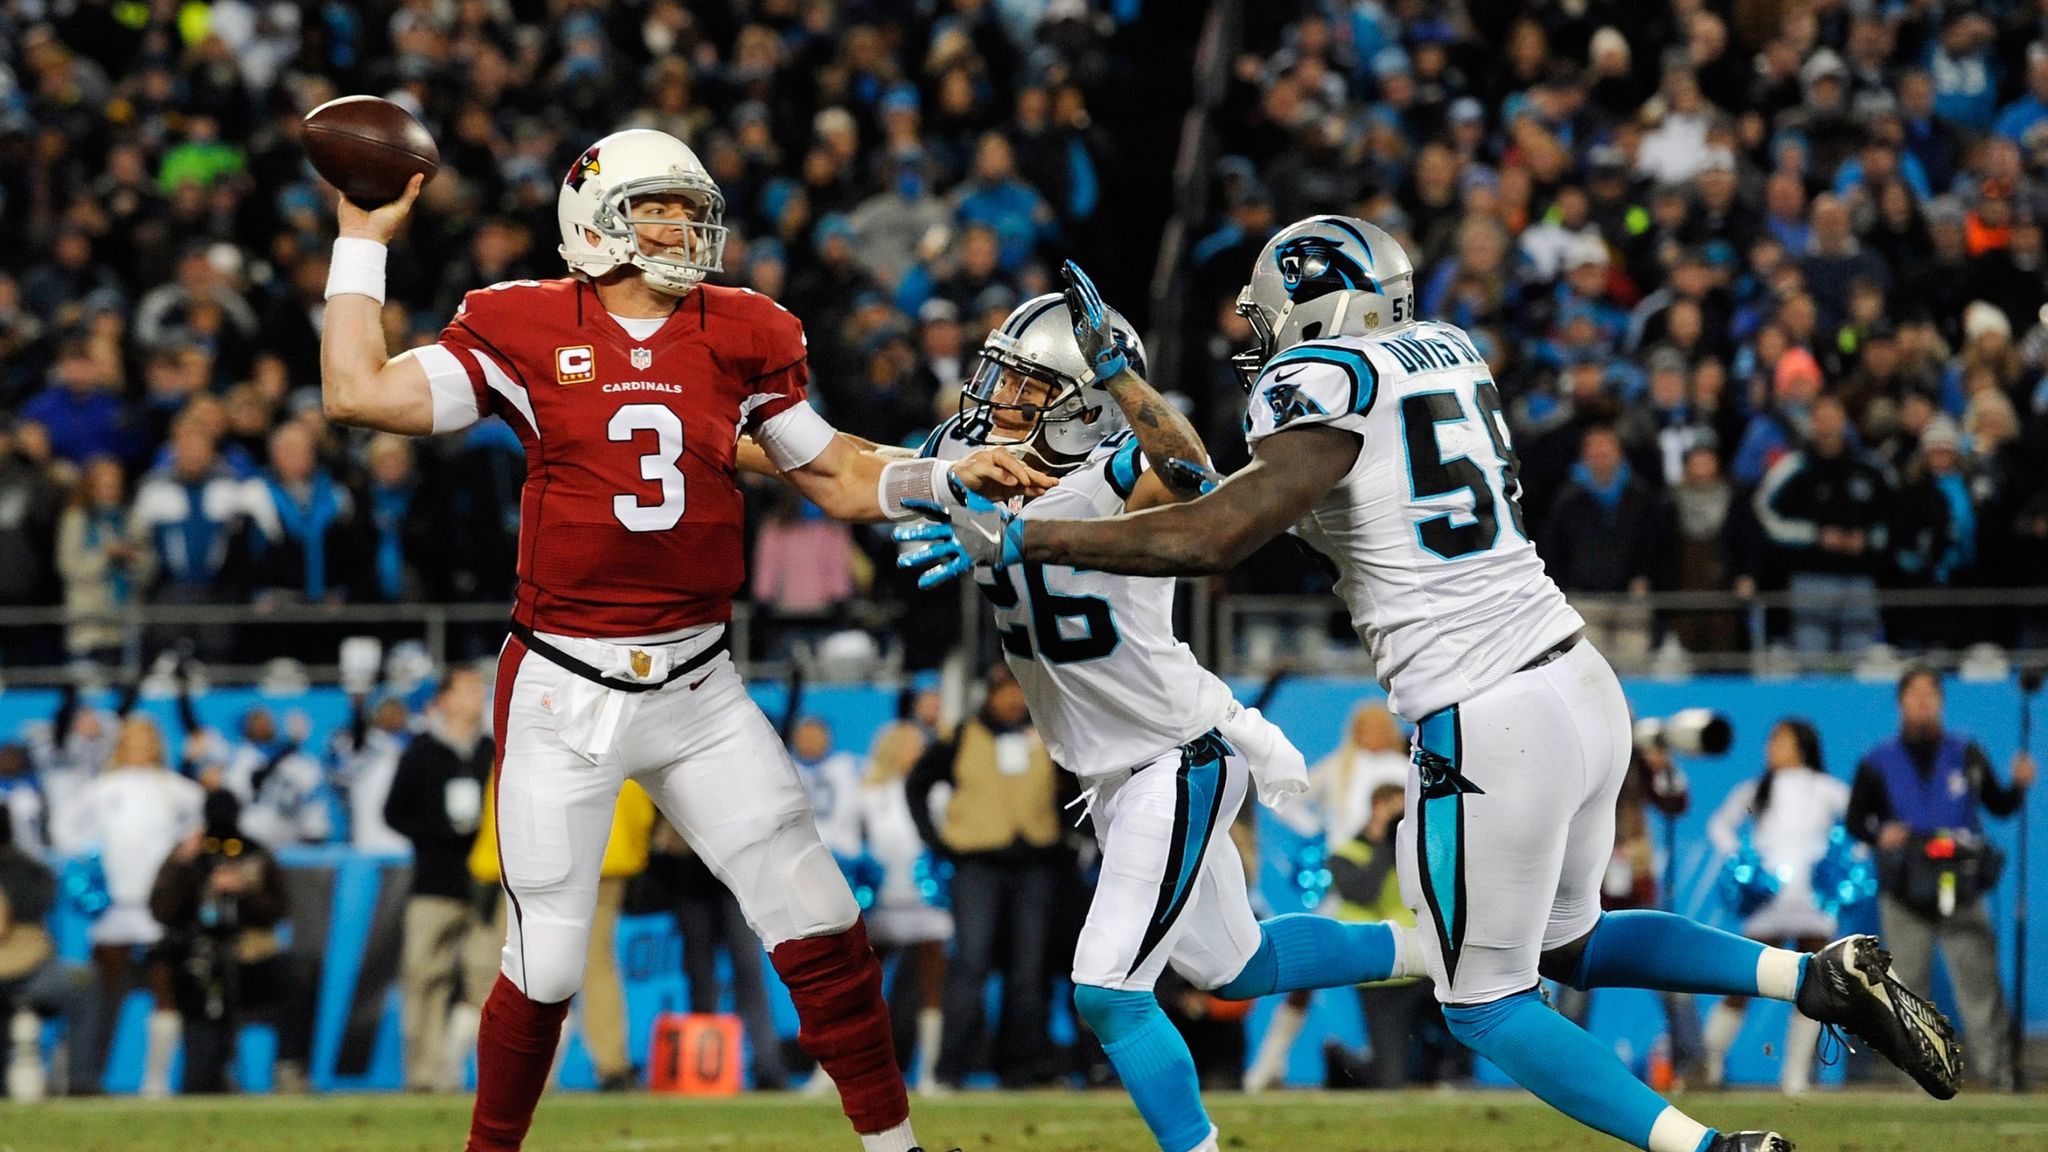 Cam Newton's 'super' effort leads Panthers to 49-15 rout of Cardinals